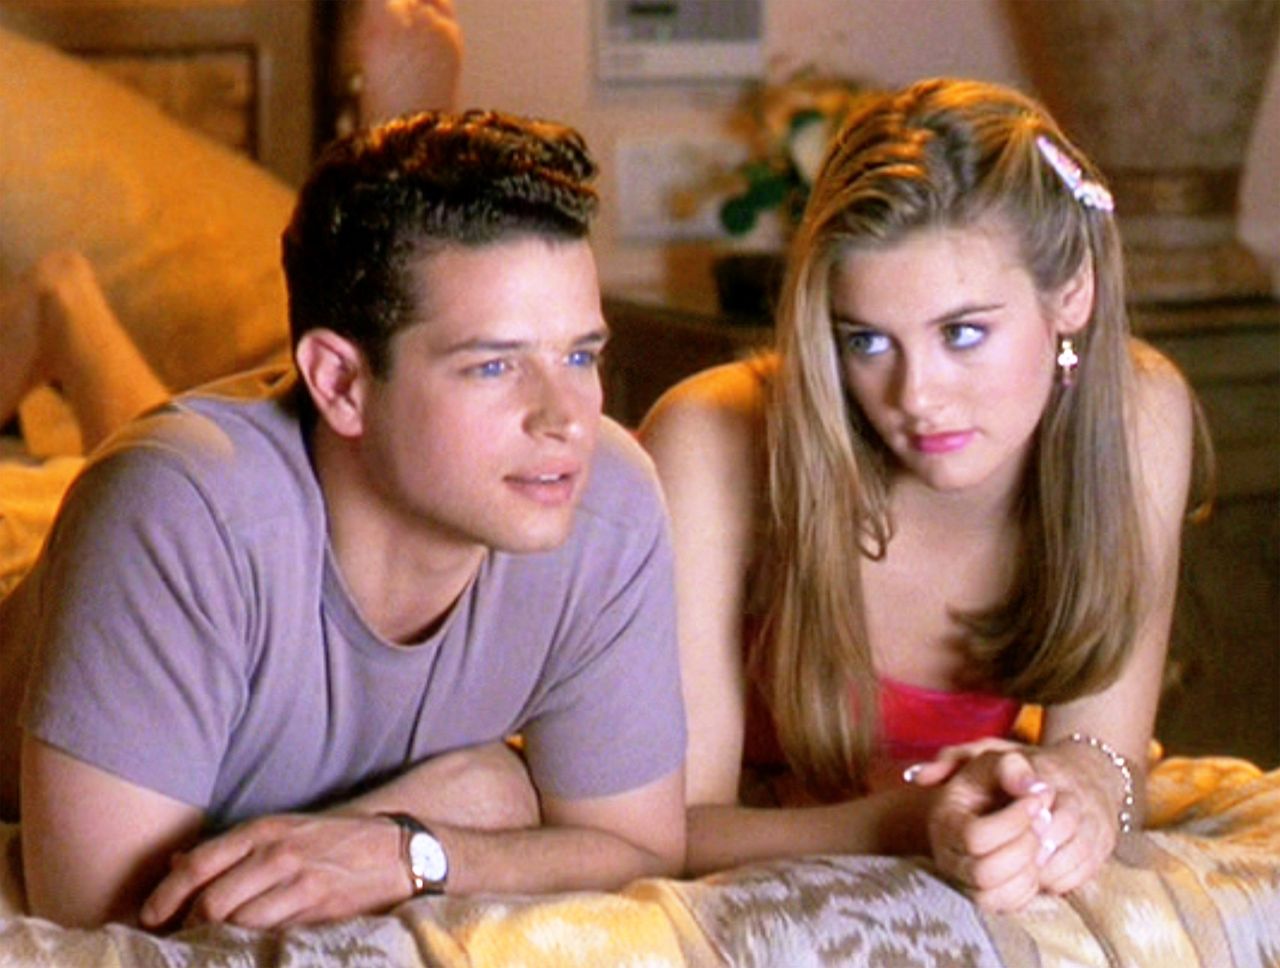 Justin Walker and Alicia Silverstone in a scene from "Clueless," released in 1995.